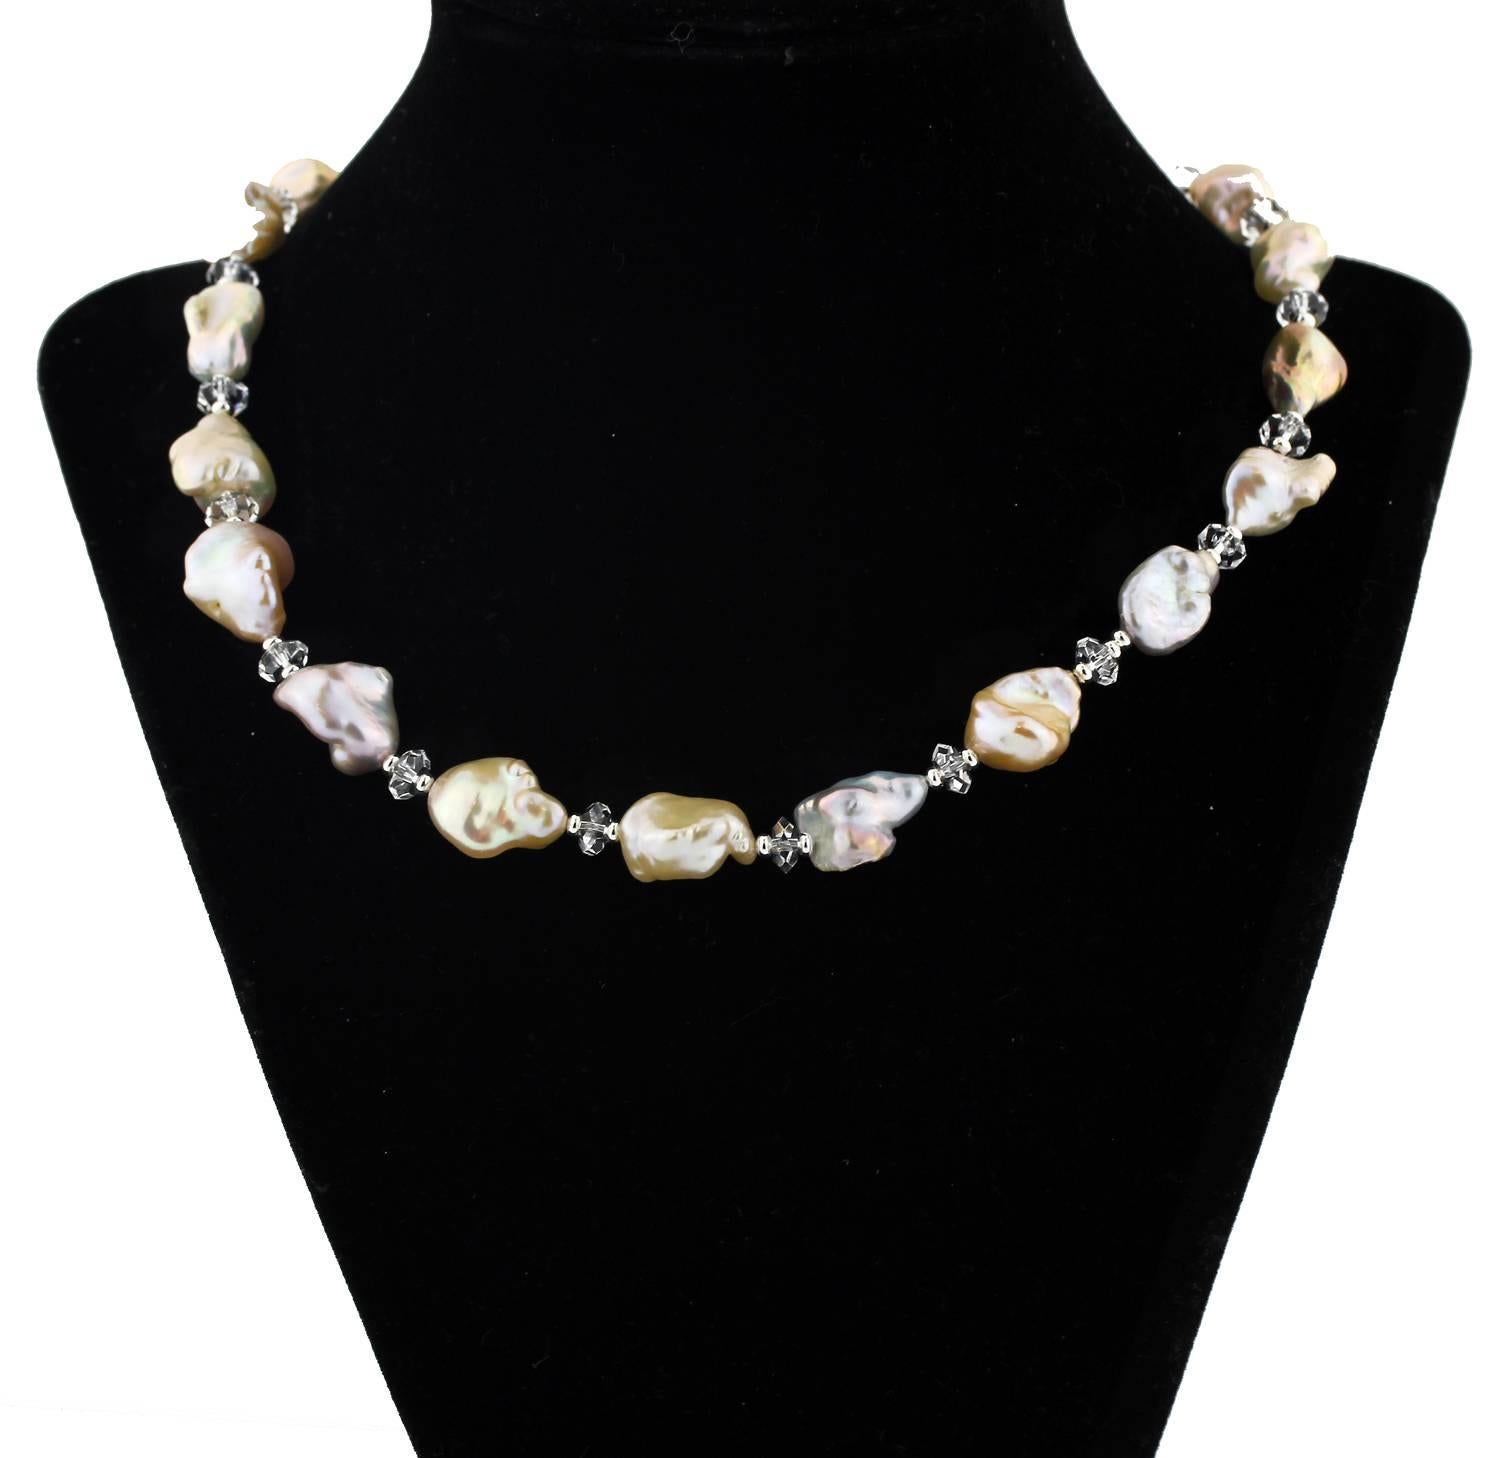 This smaller brilliantly glowing Pearls are enhanced with sparkling gemcut 